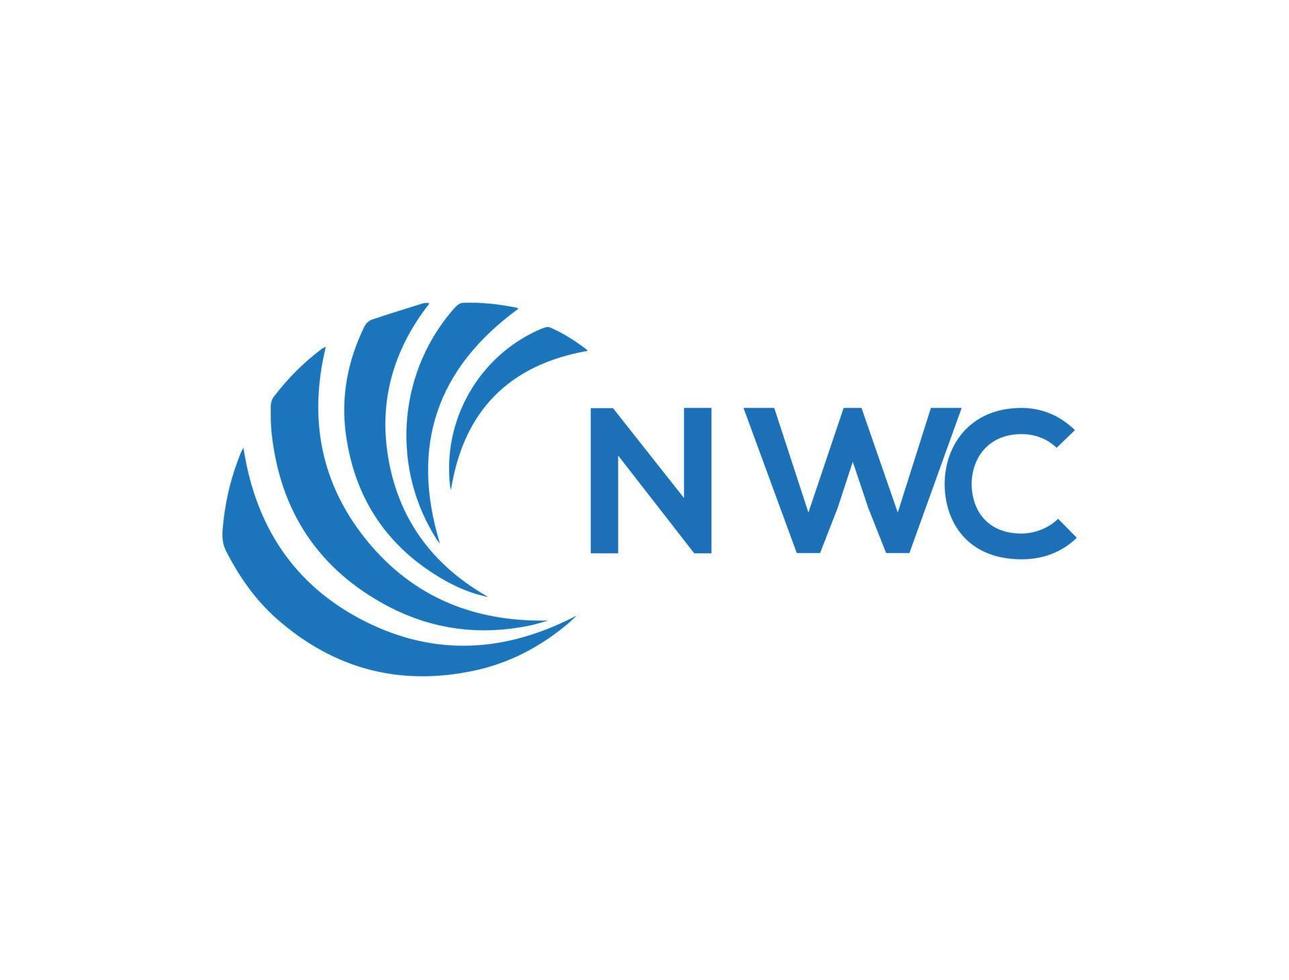 NWC letter logo design on white background. NWC creative circle letter ...